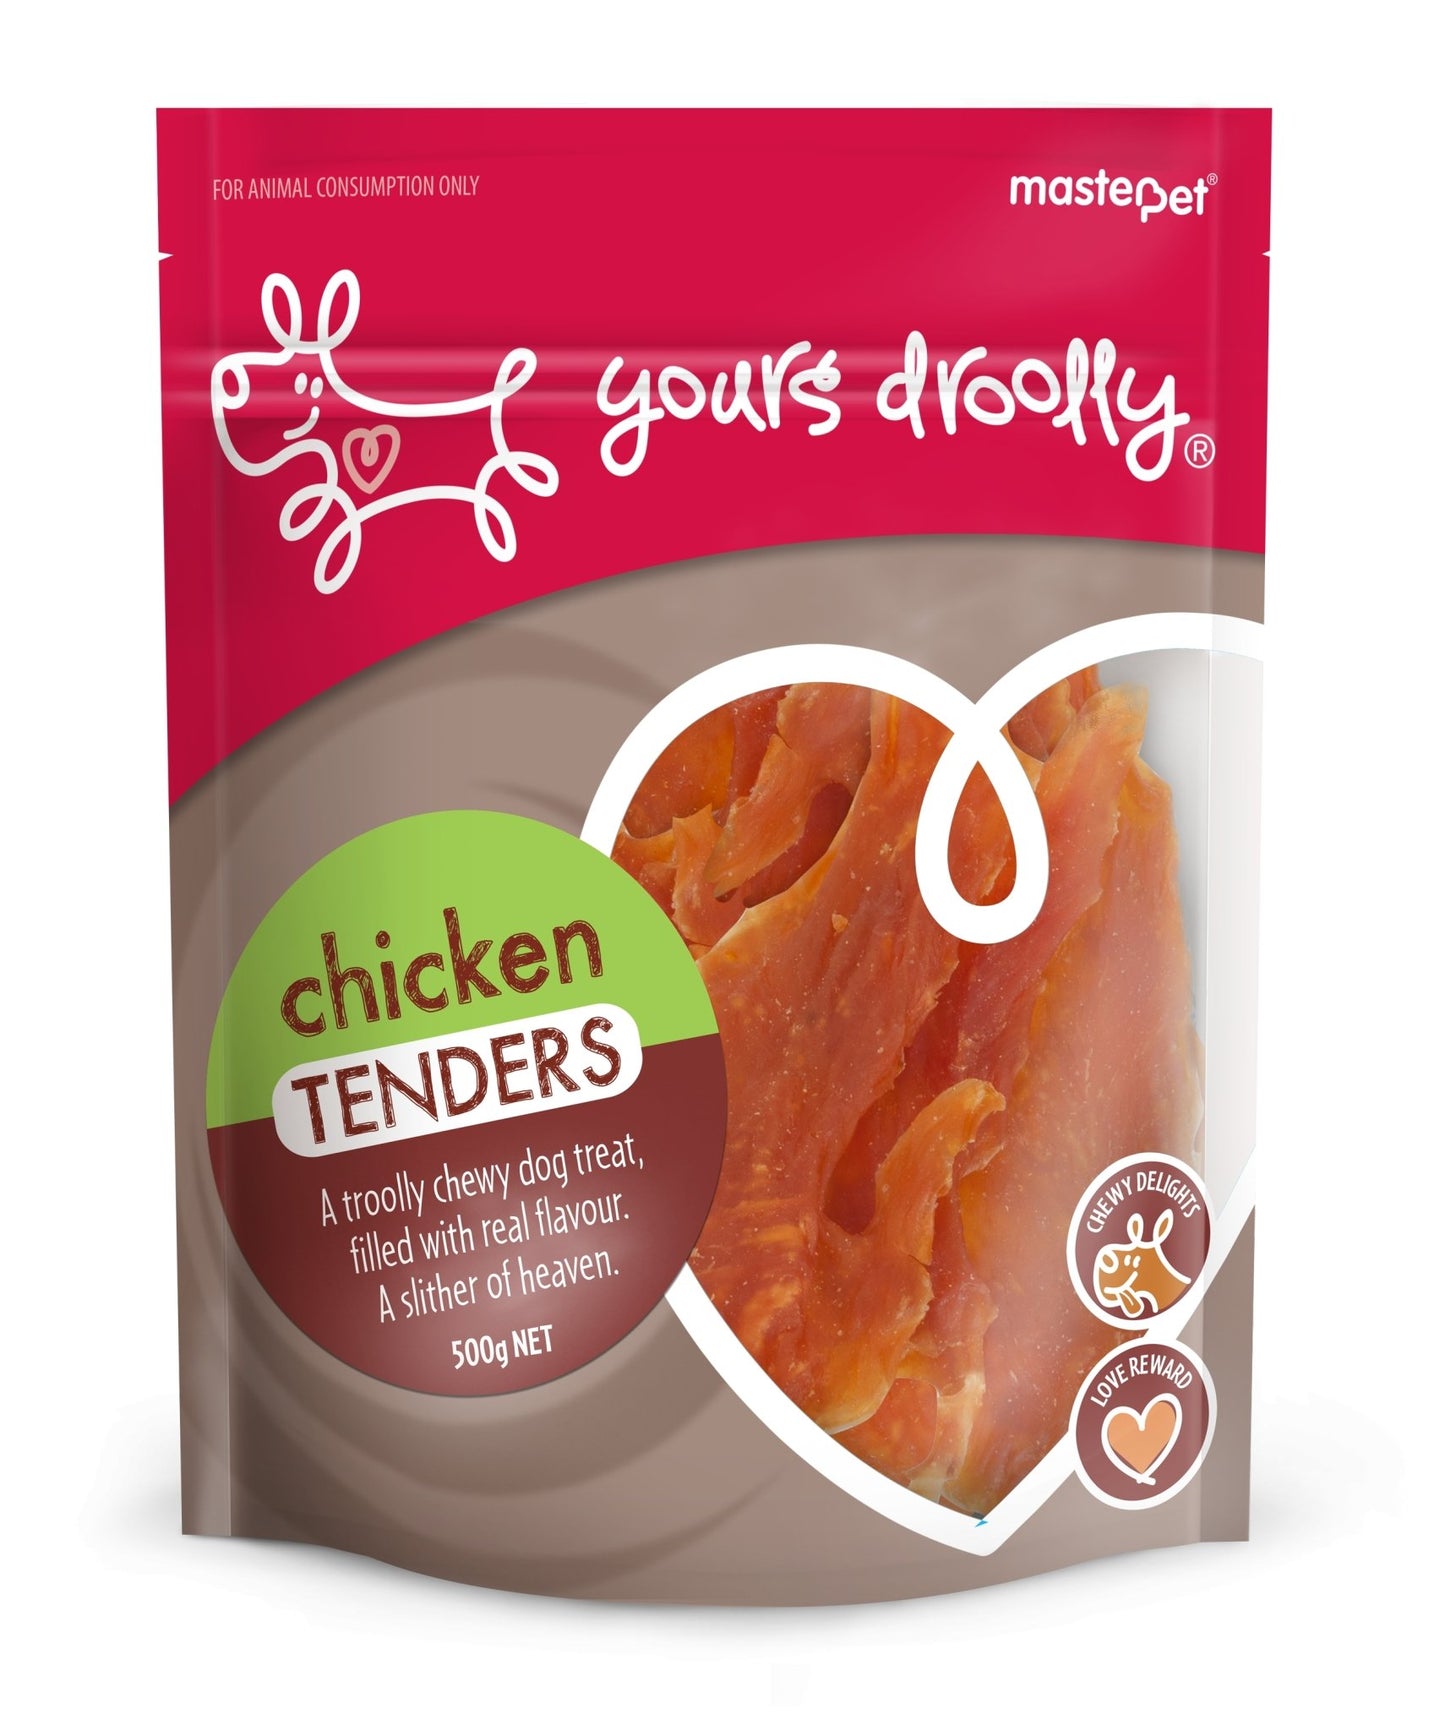 Yours Droolly Chicken Tenders 500g - Woonona Petfood & Produce